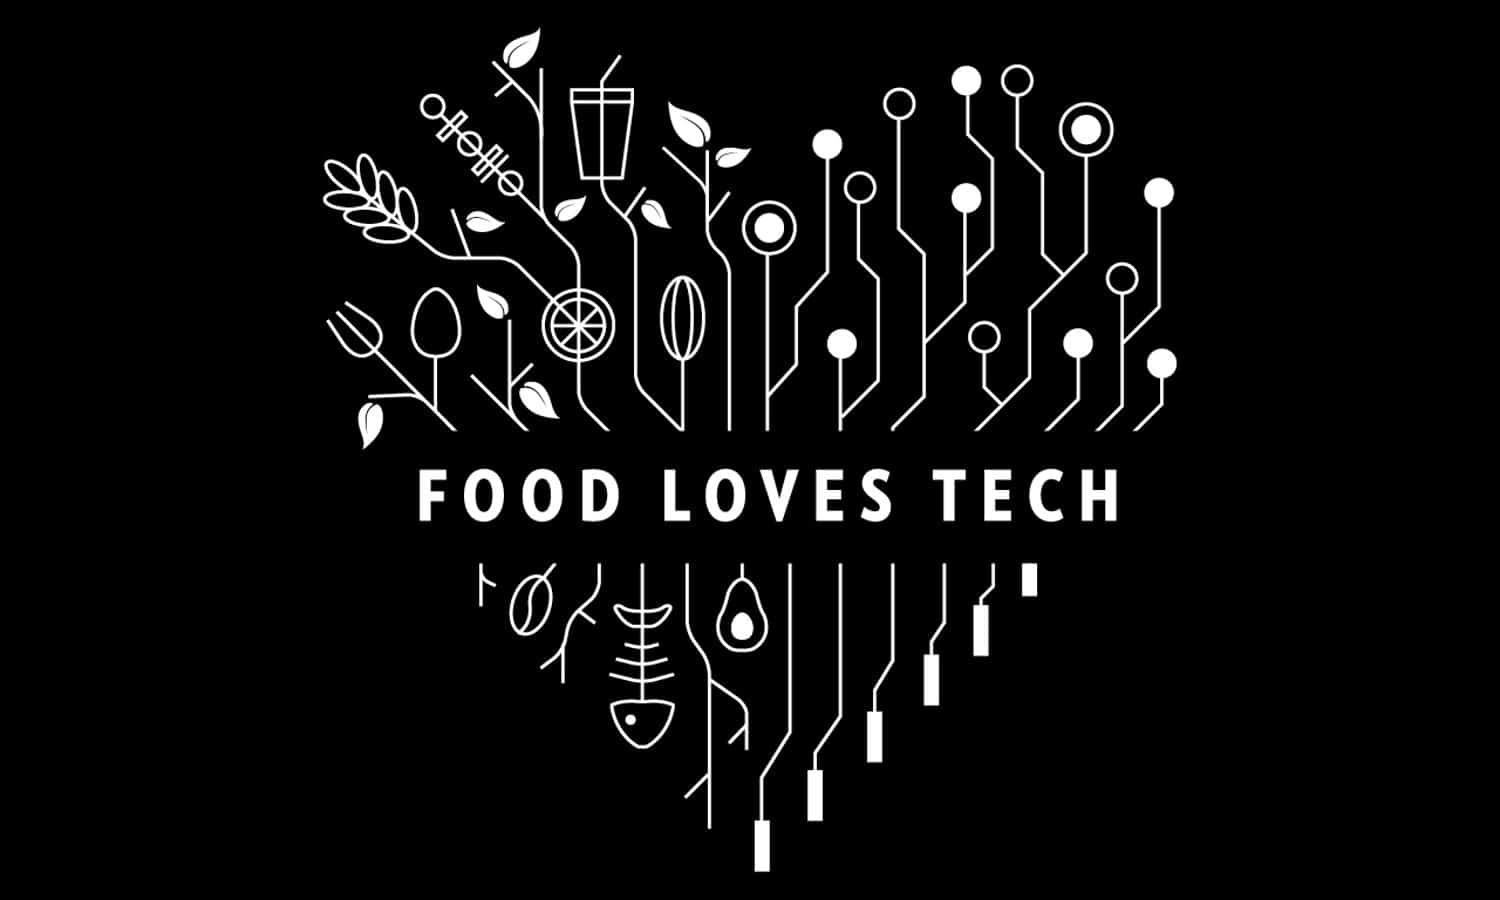 Innovators and enthusiasts will explore food’s not-too-distant future at Food Loves Tech in Brooklyn on November 3rd and 4th.